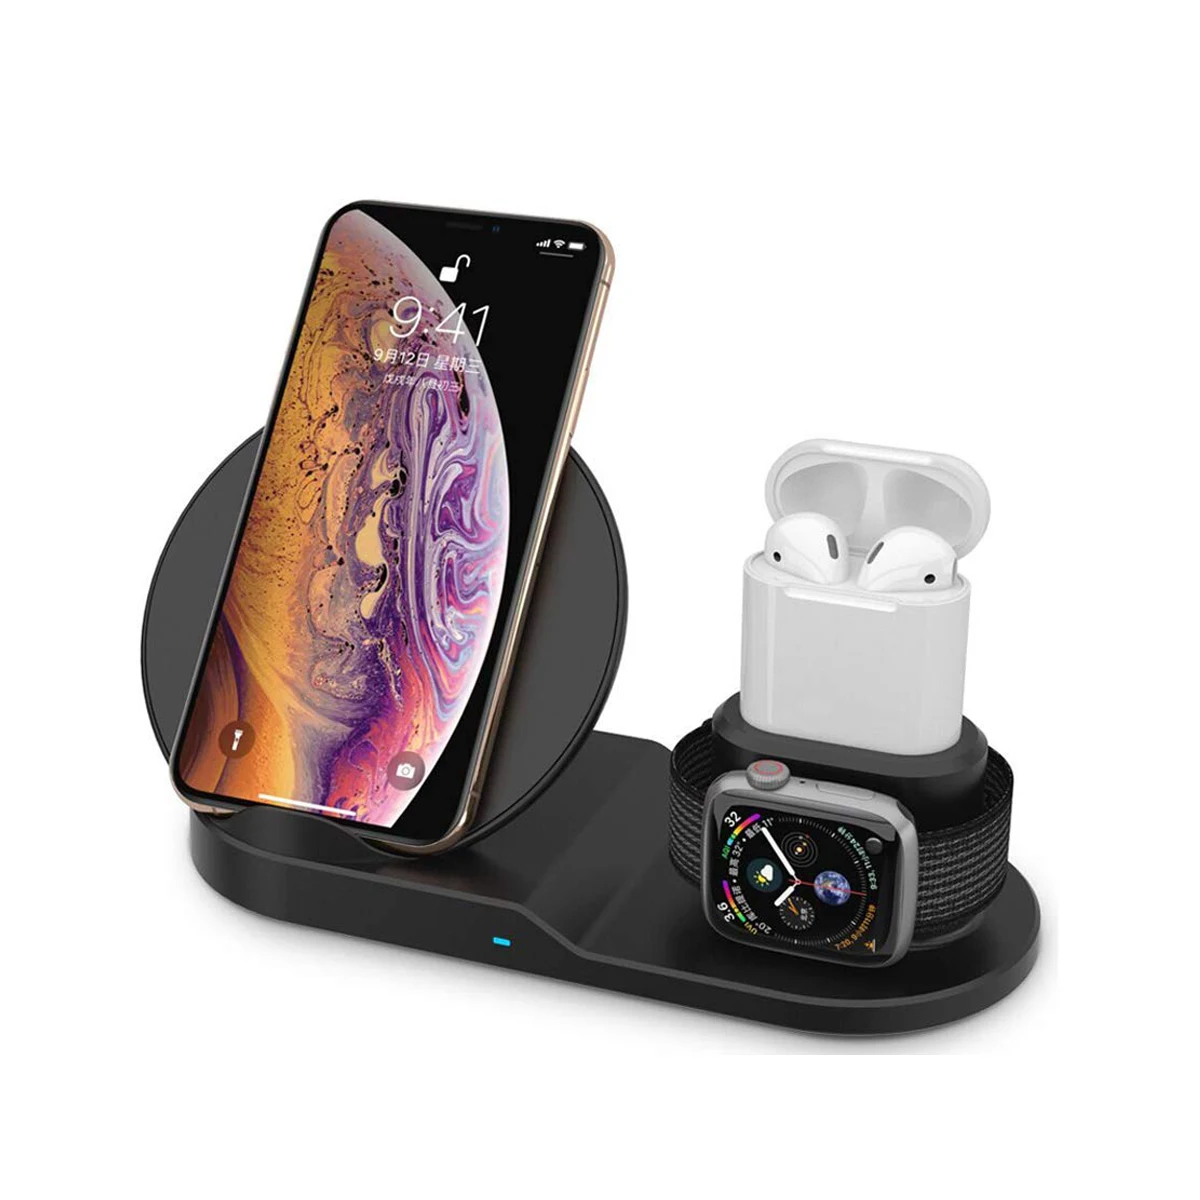 

3 in 1 Wireless Charger Stand Station, (10W/7.5W) Fast Wireless Charging Dock for iPhone apple watch Airpod, Black & white